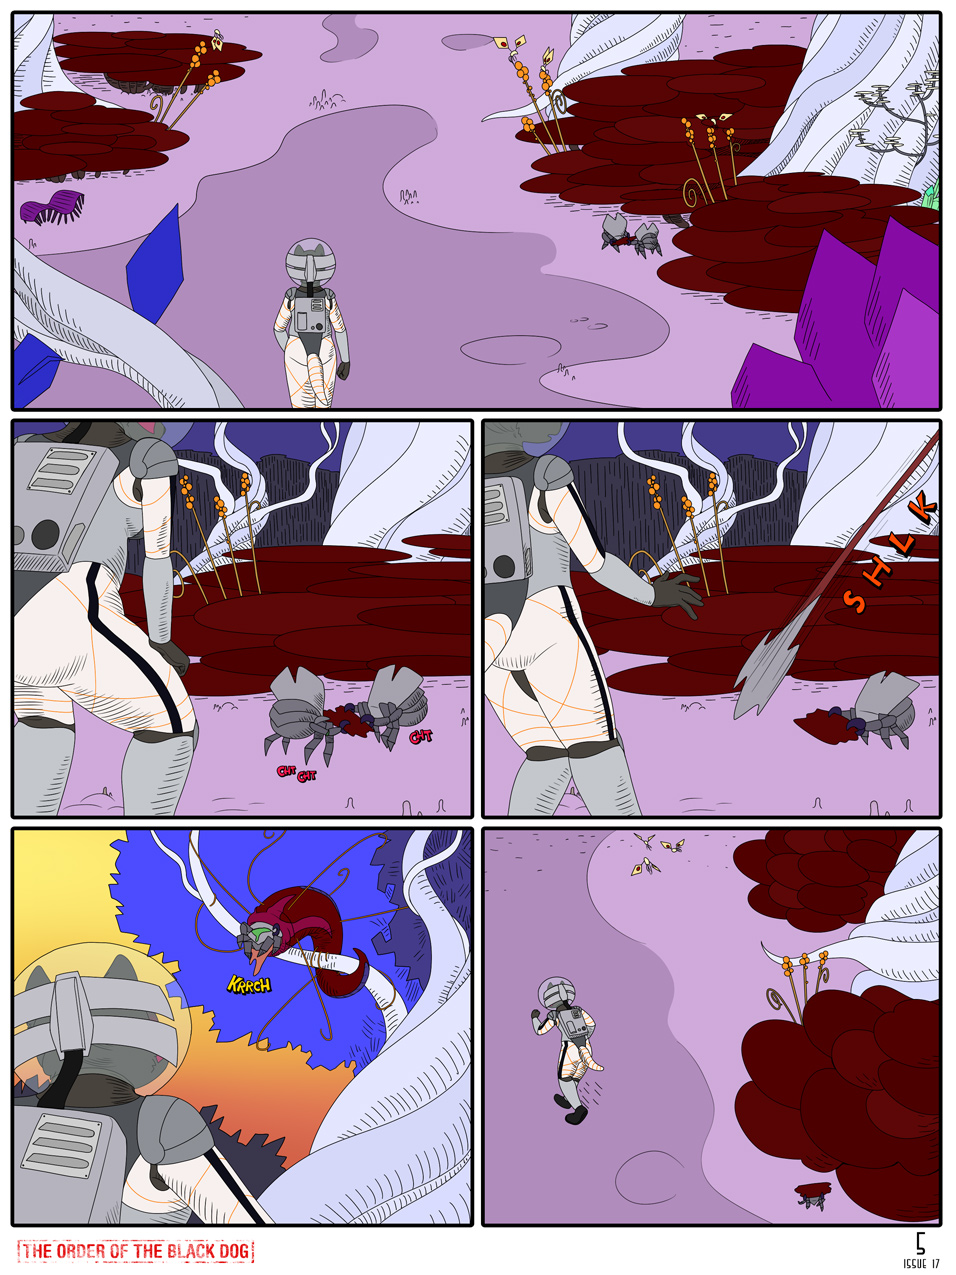 Issue 17, Page 5